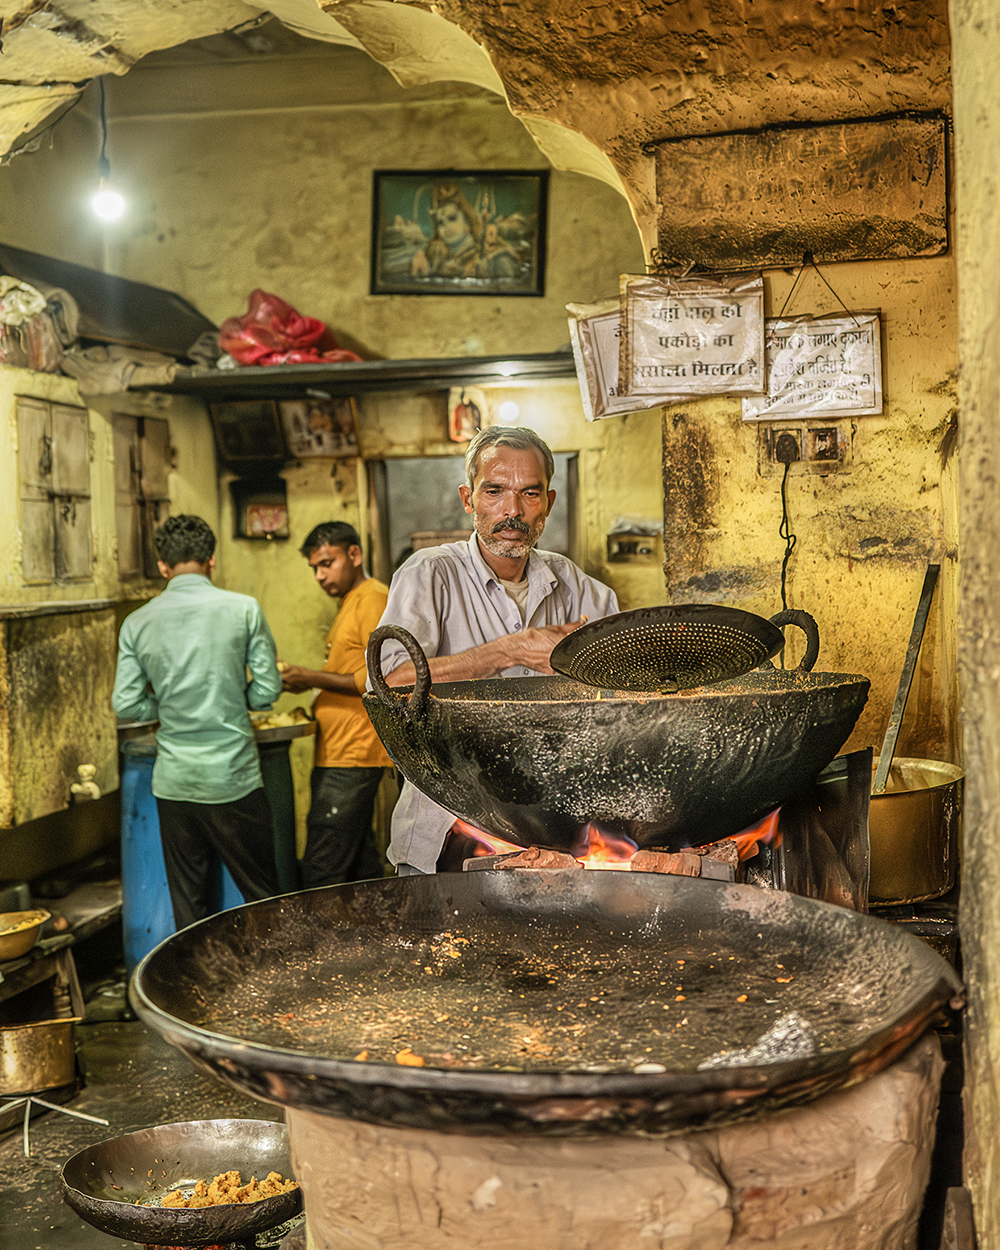 Cook at Work, India